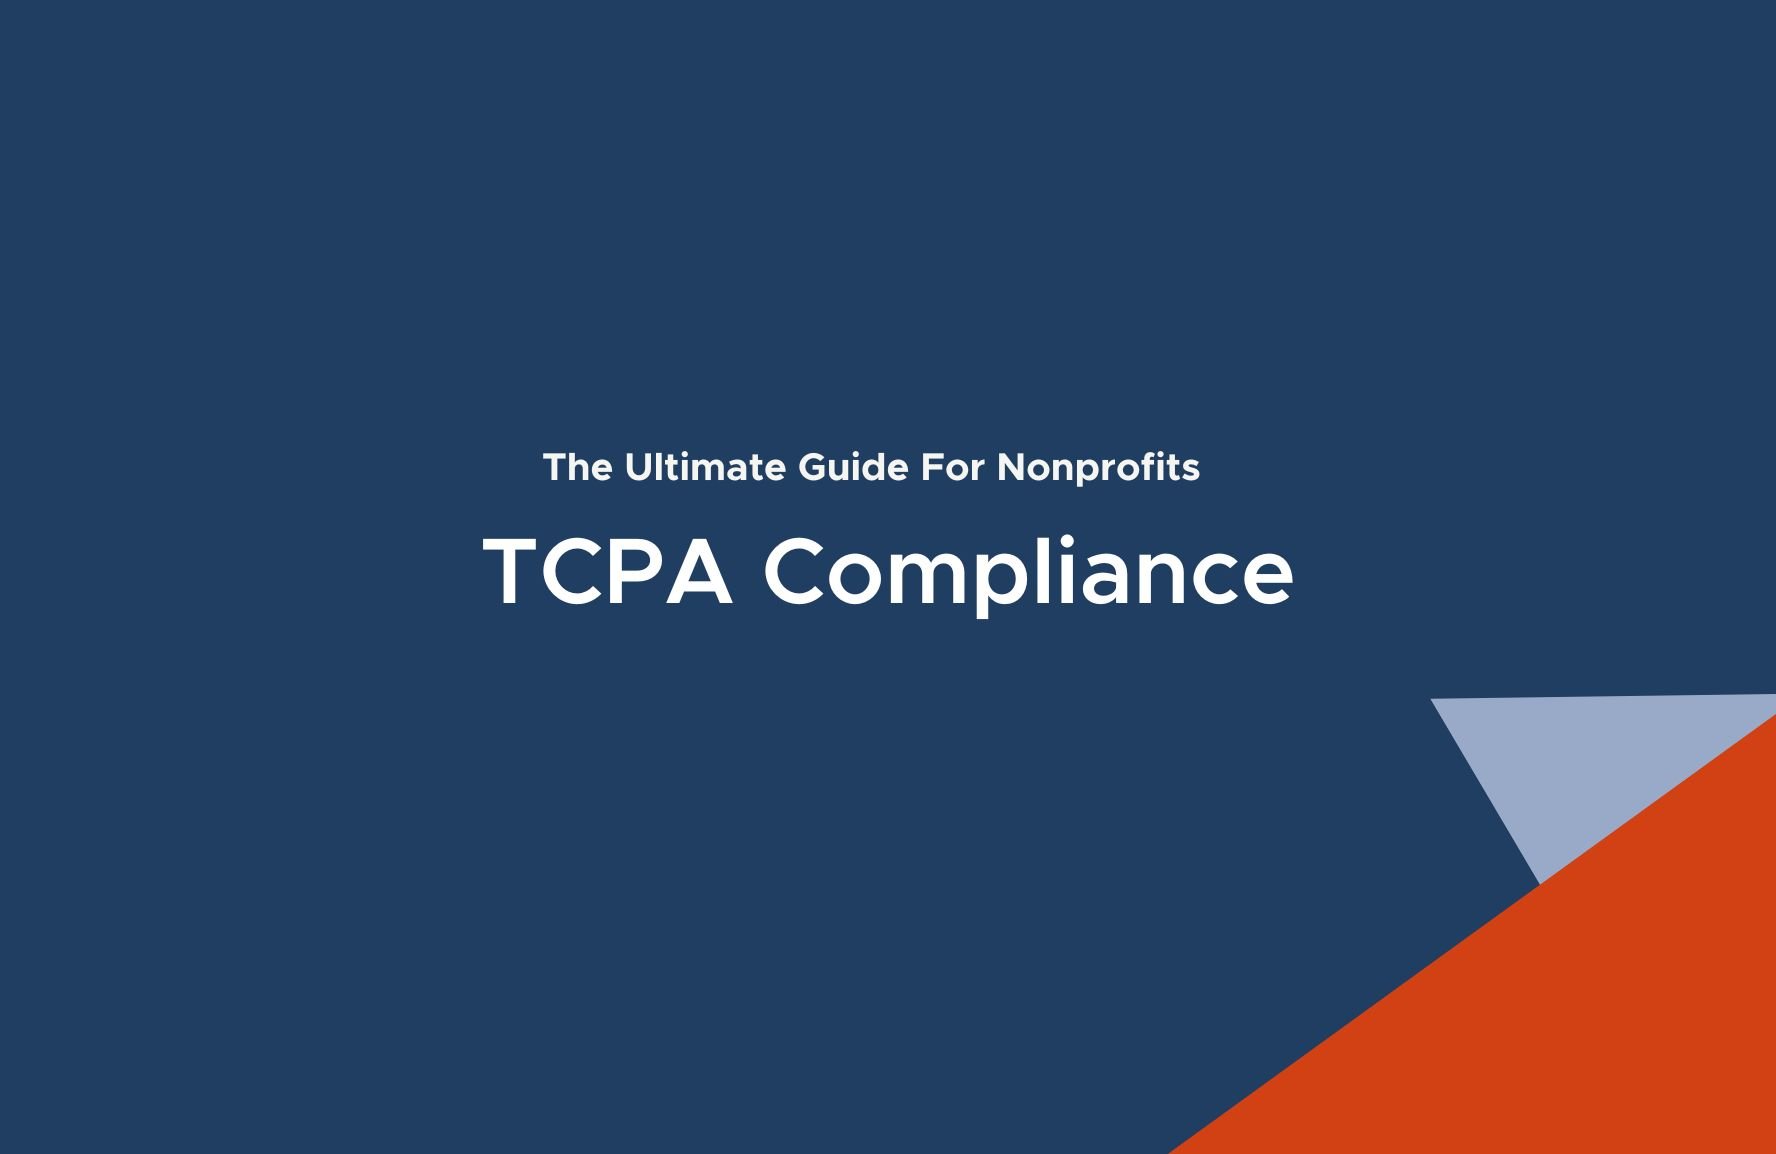 TCPA compliance is important for nonprofits to avoid legal fines.